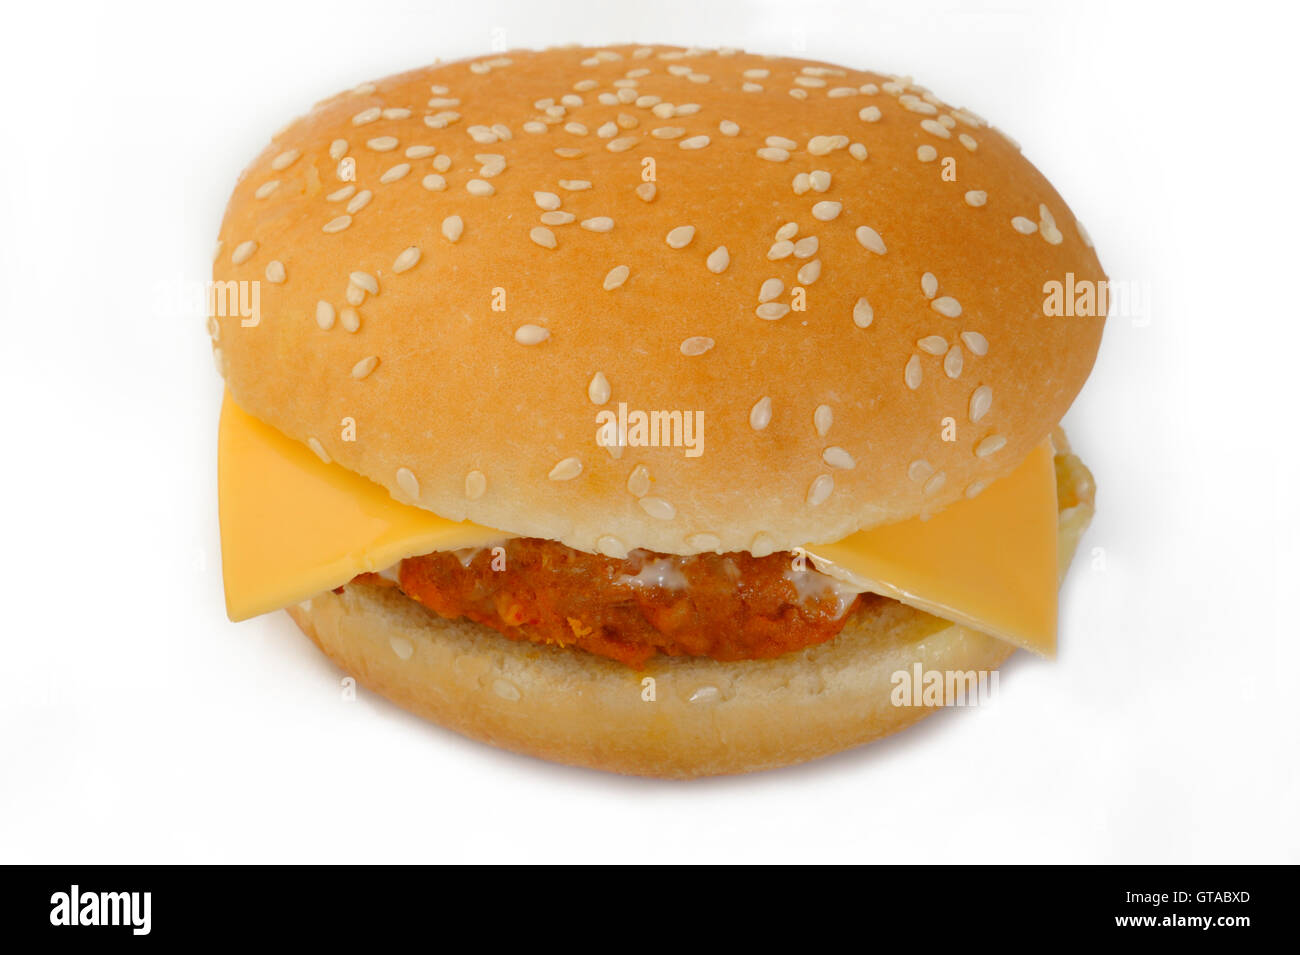 Burger with chicken on white background Stock Photo